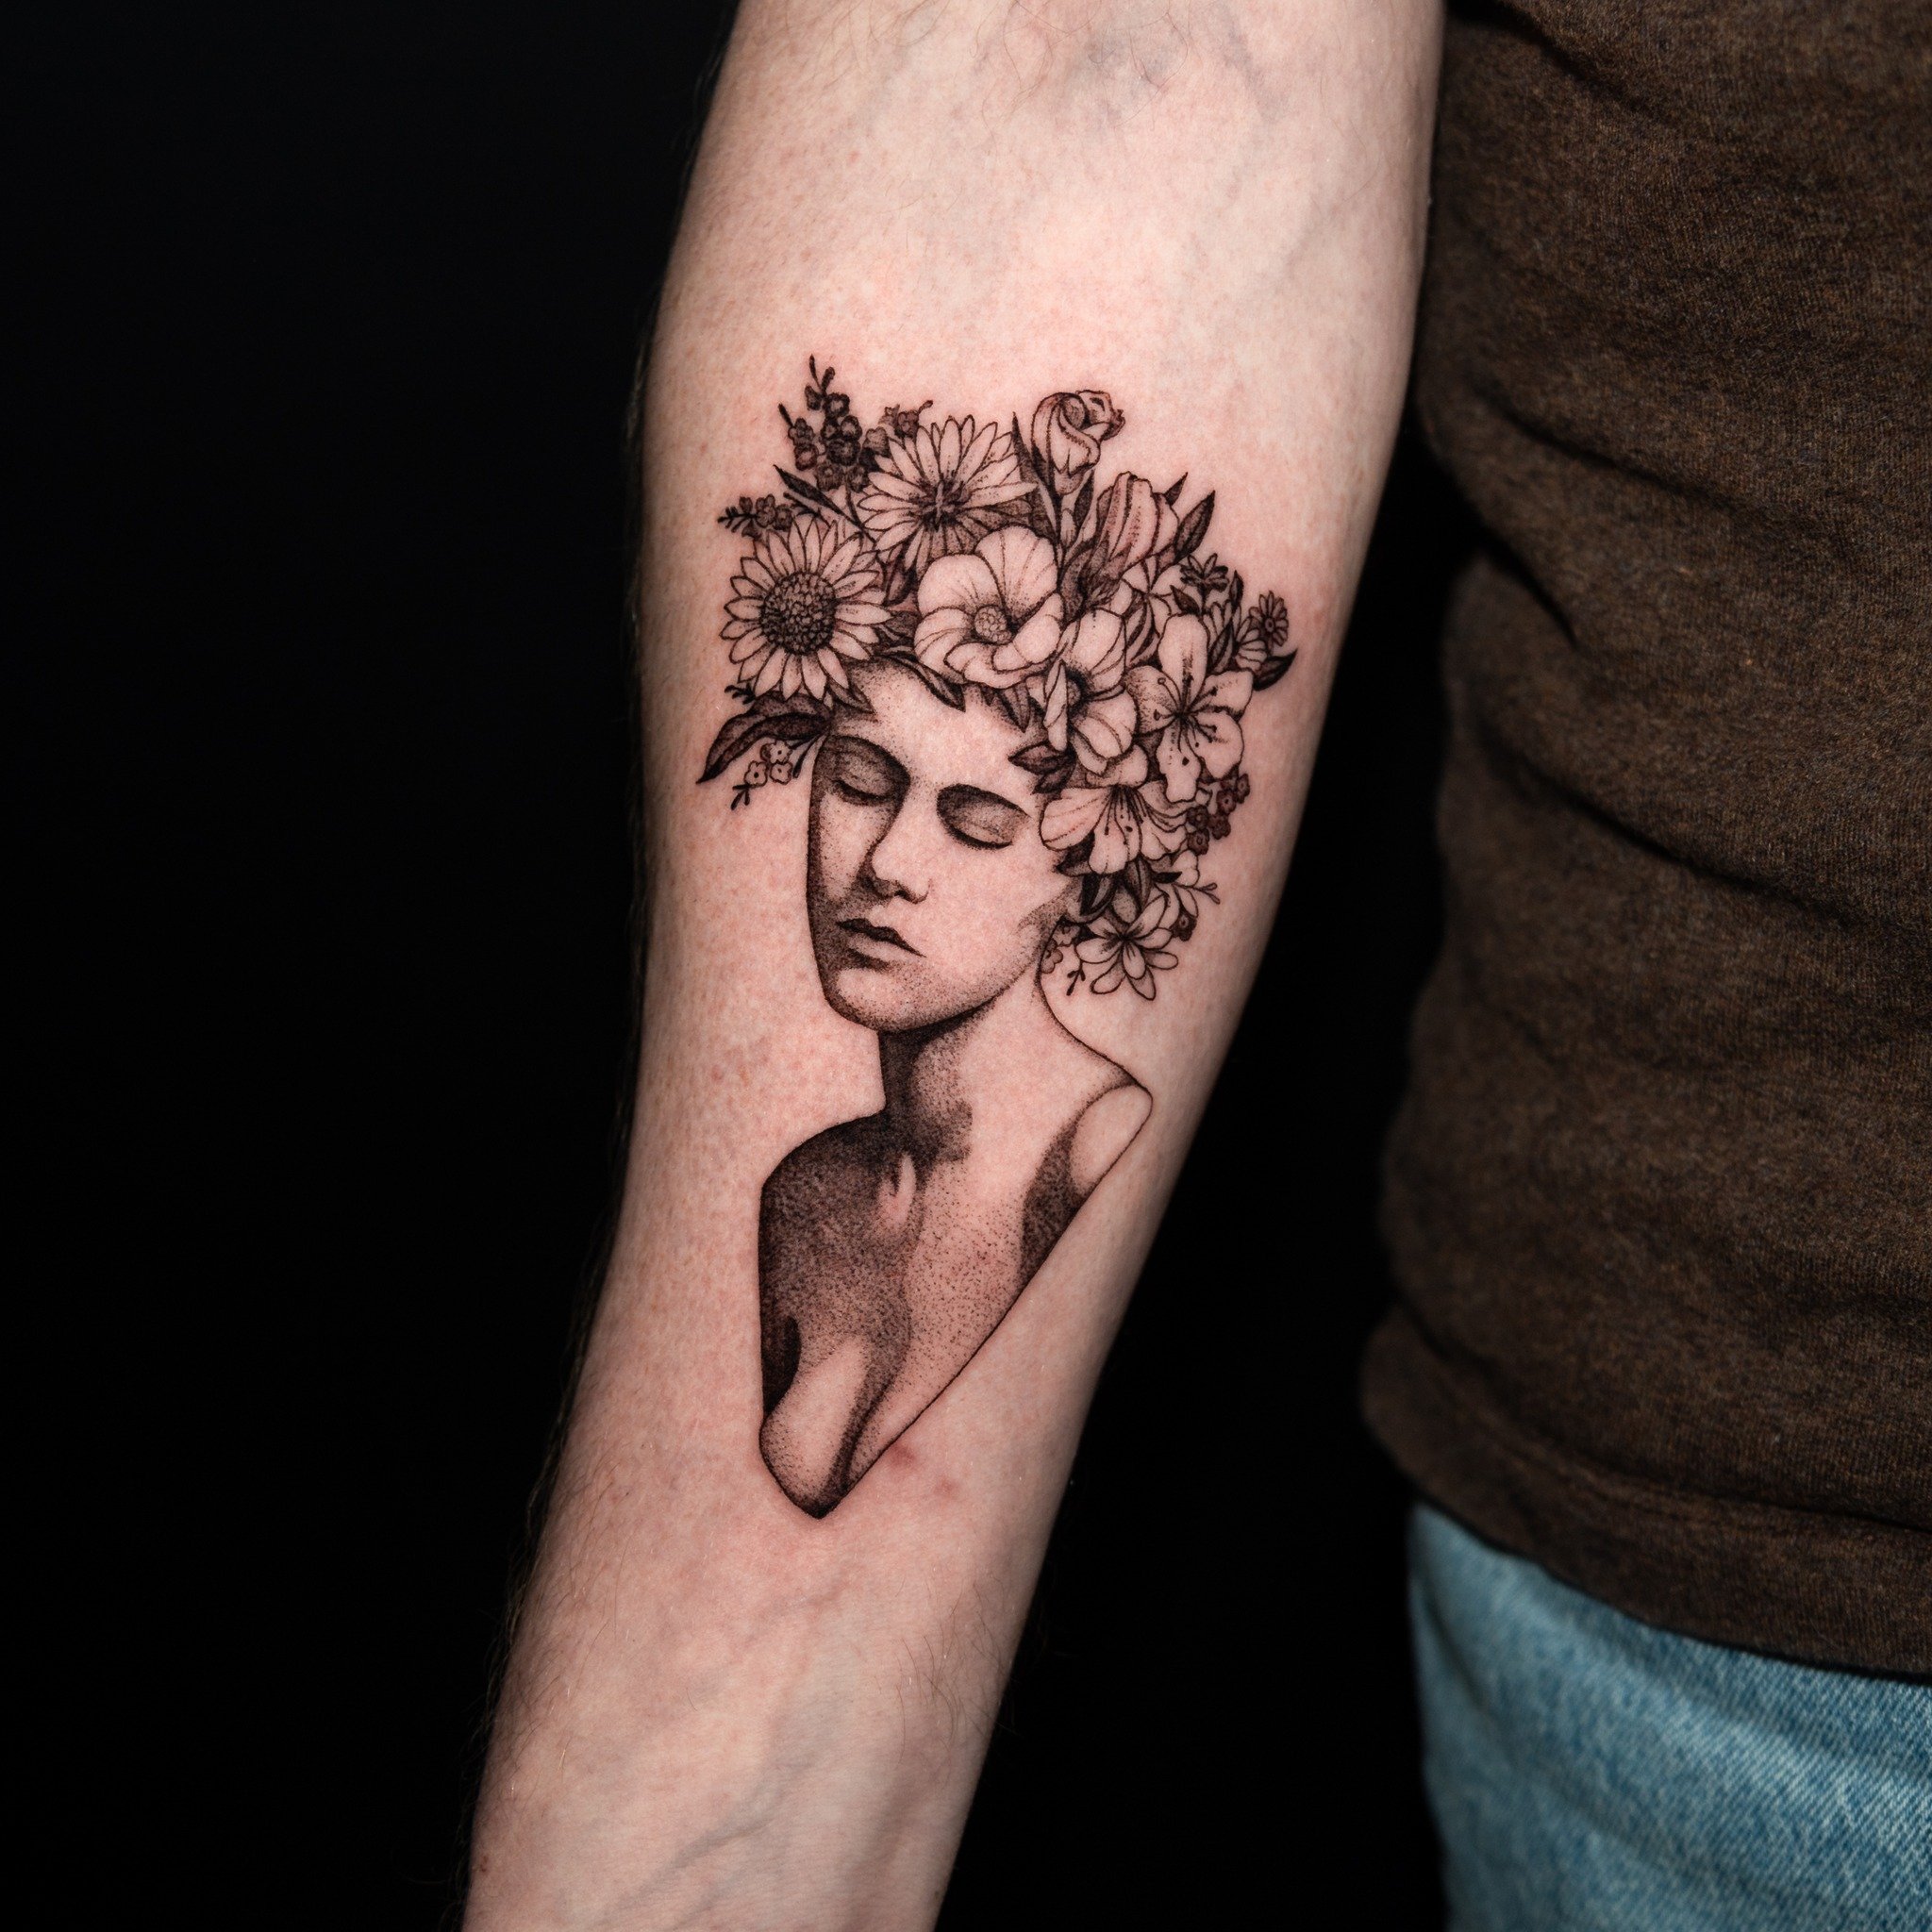 Flowergirl, had fun doing this one! Email me if you want to set up an appointment: info@jimburgman.com
#flowertattoo #smallportraittattoo #detailedtattoo #smalltattoo #3rl #3rltattoo #finelinetattoos #tattooideas #tattooartists